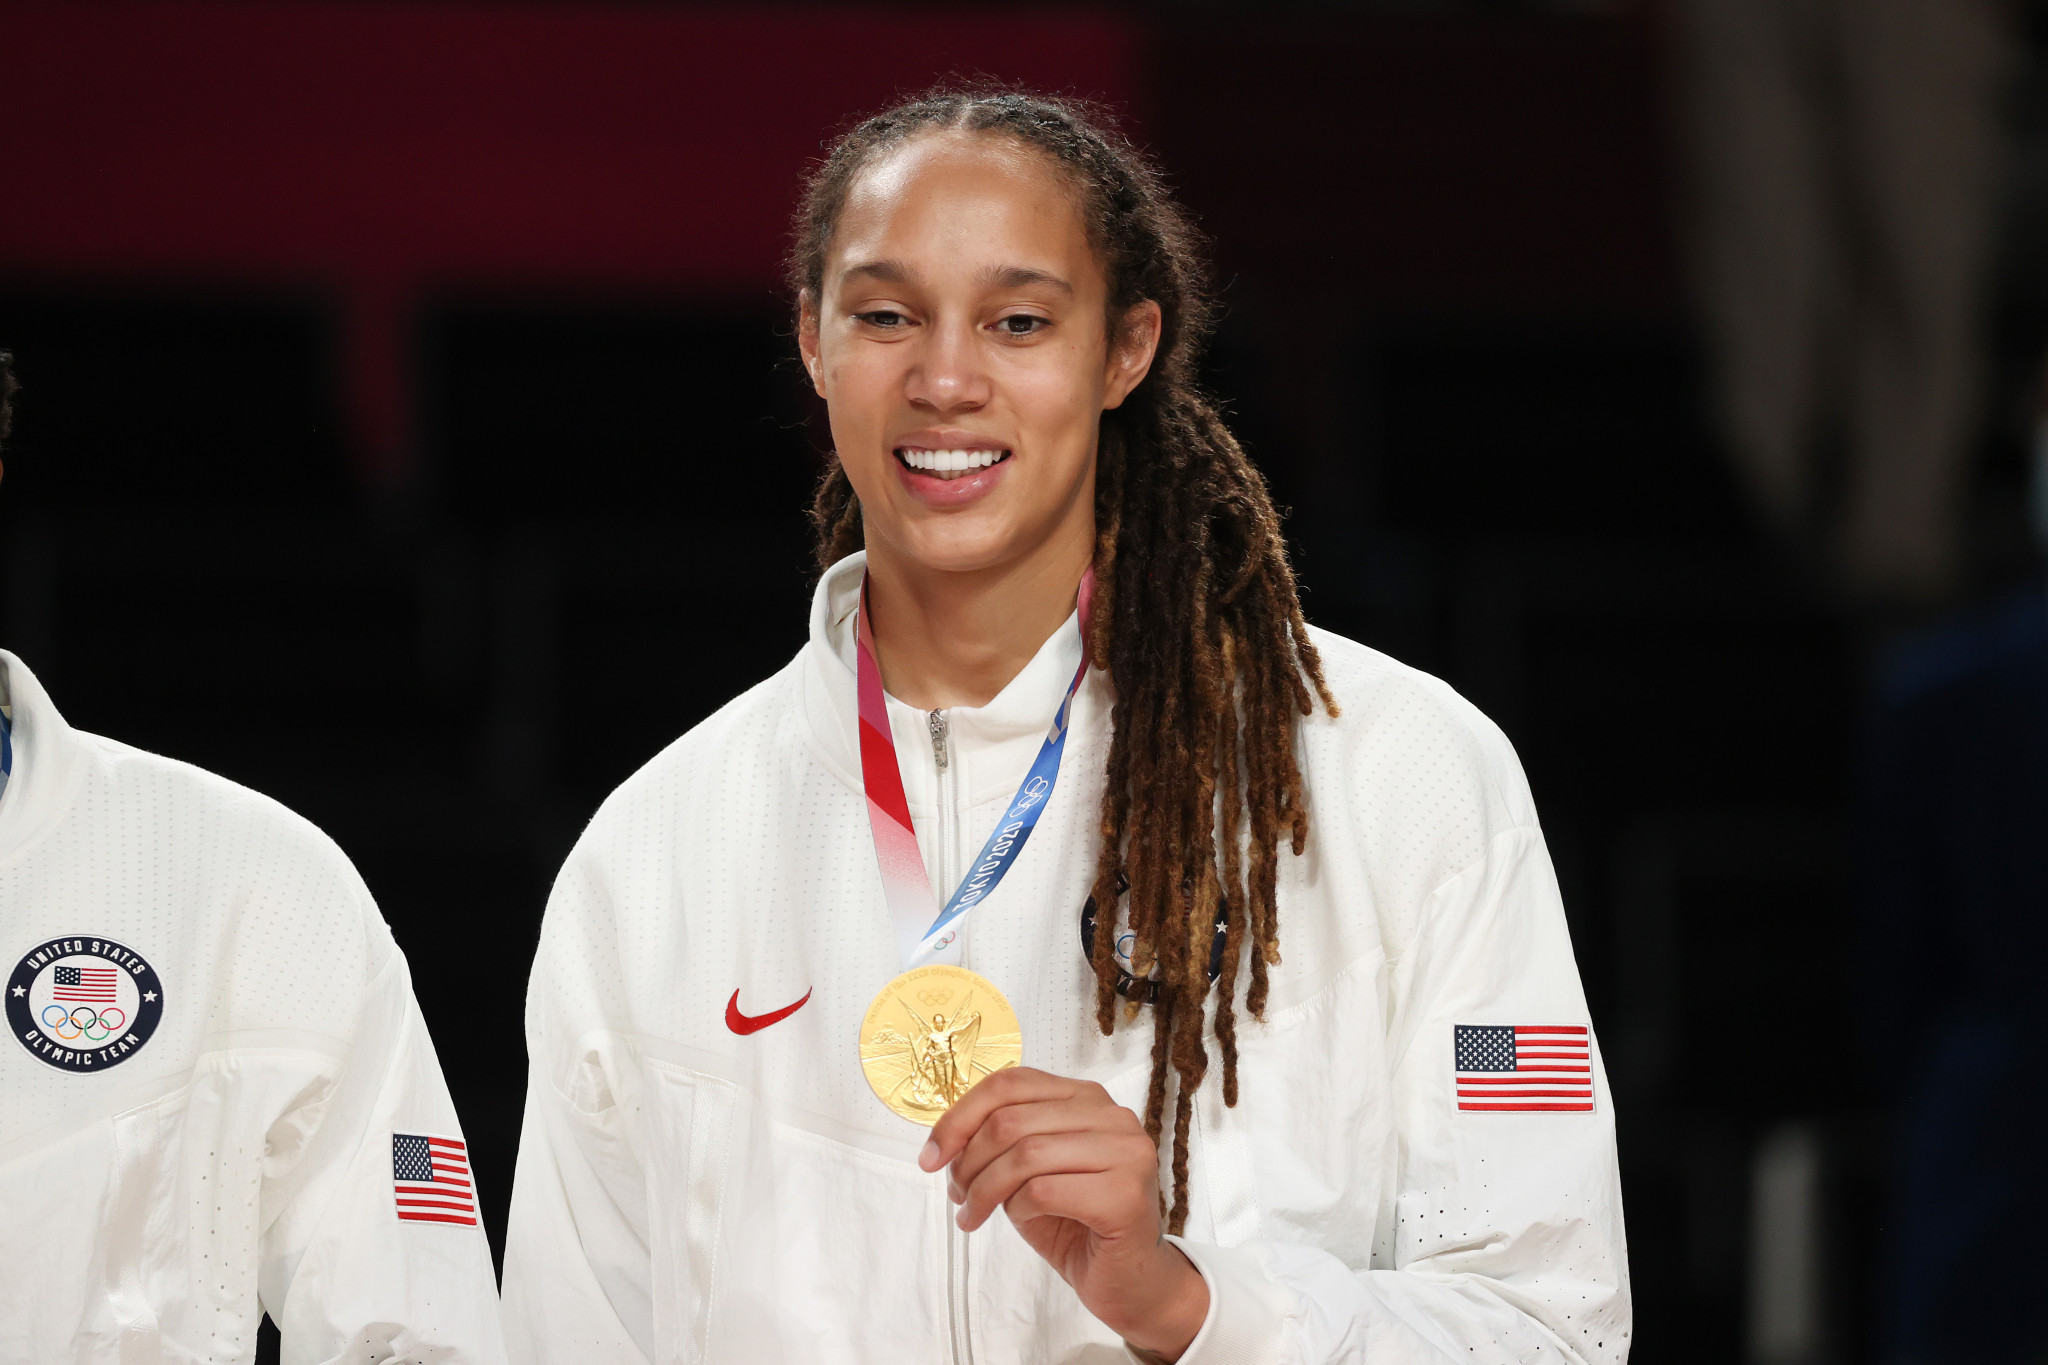 Brittney Griner has won the Olympic gold medal on two occasions ©Getty Images